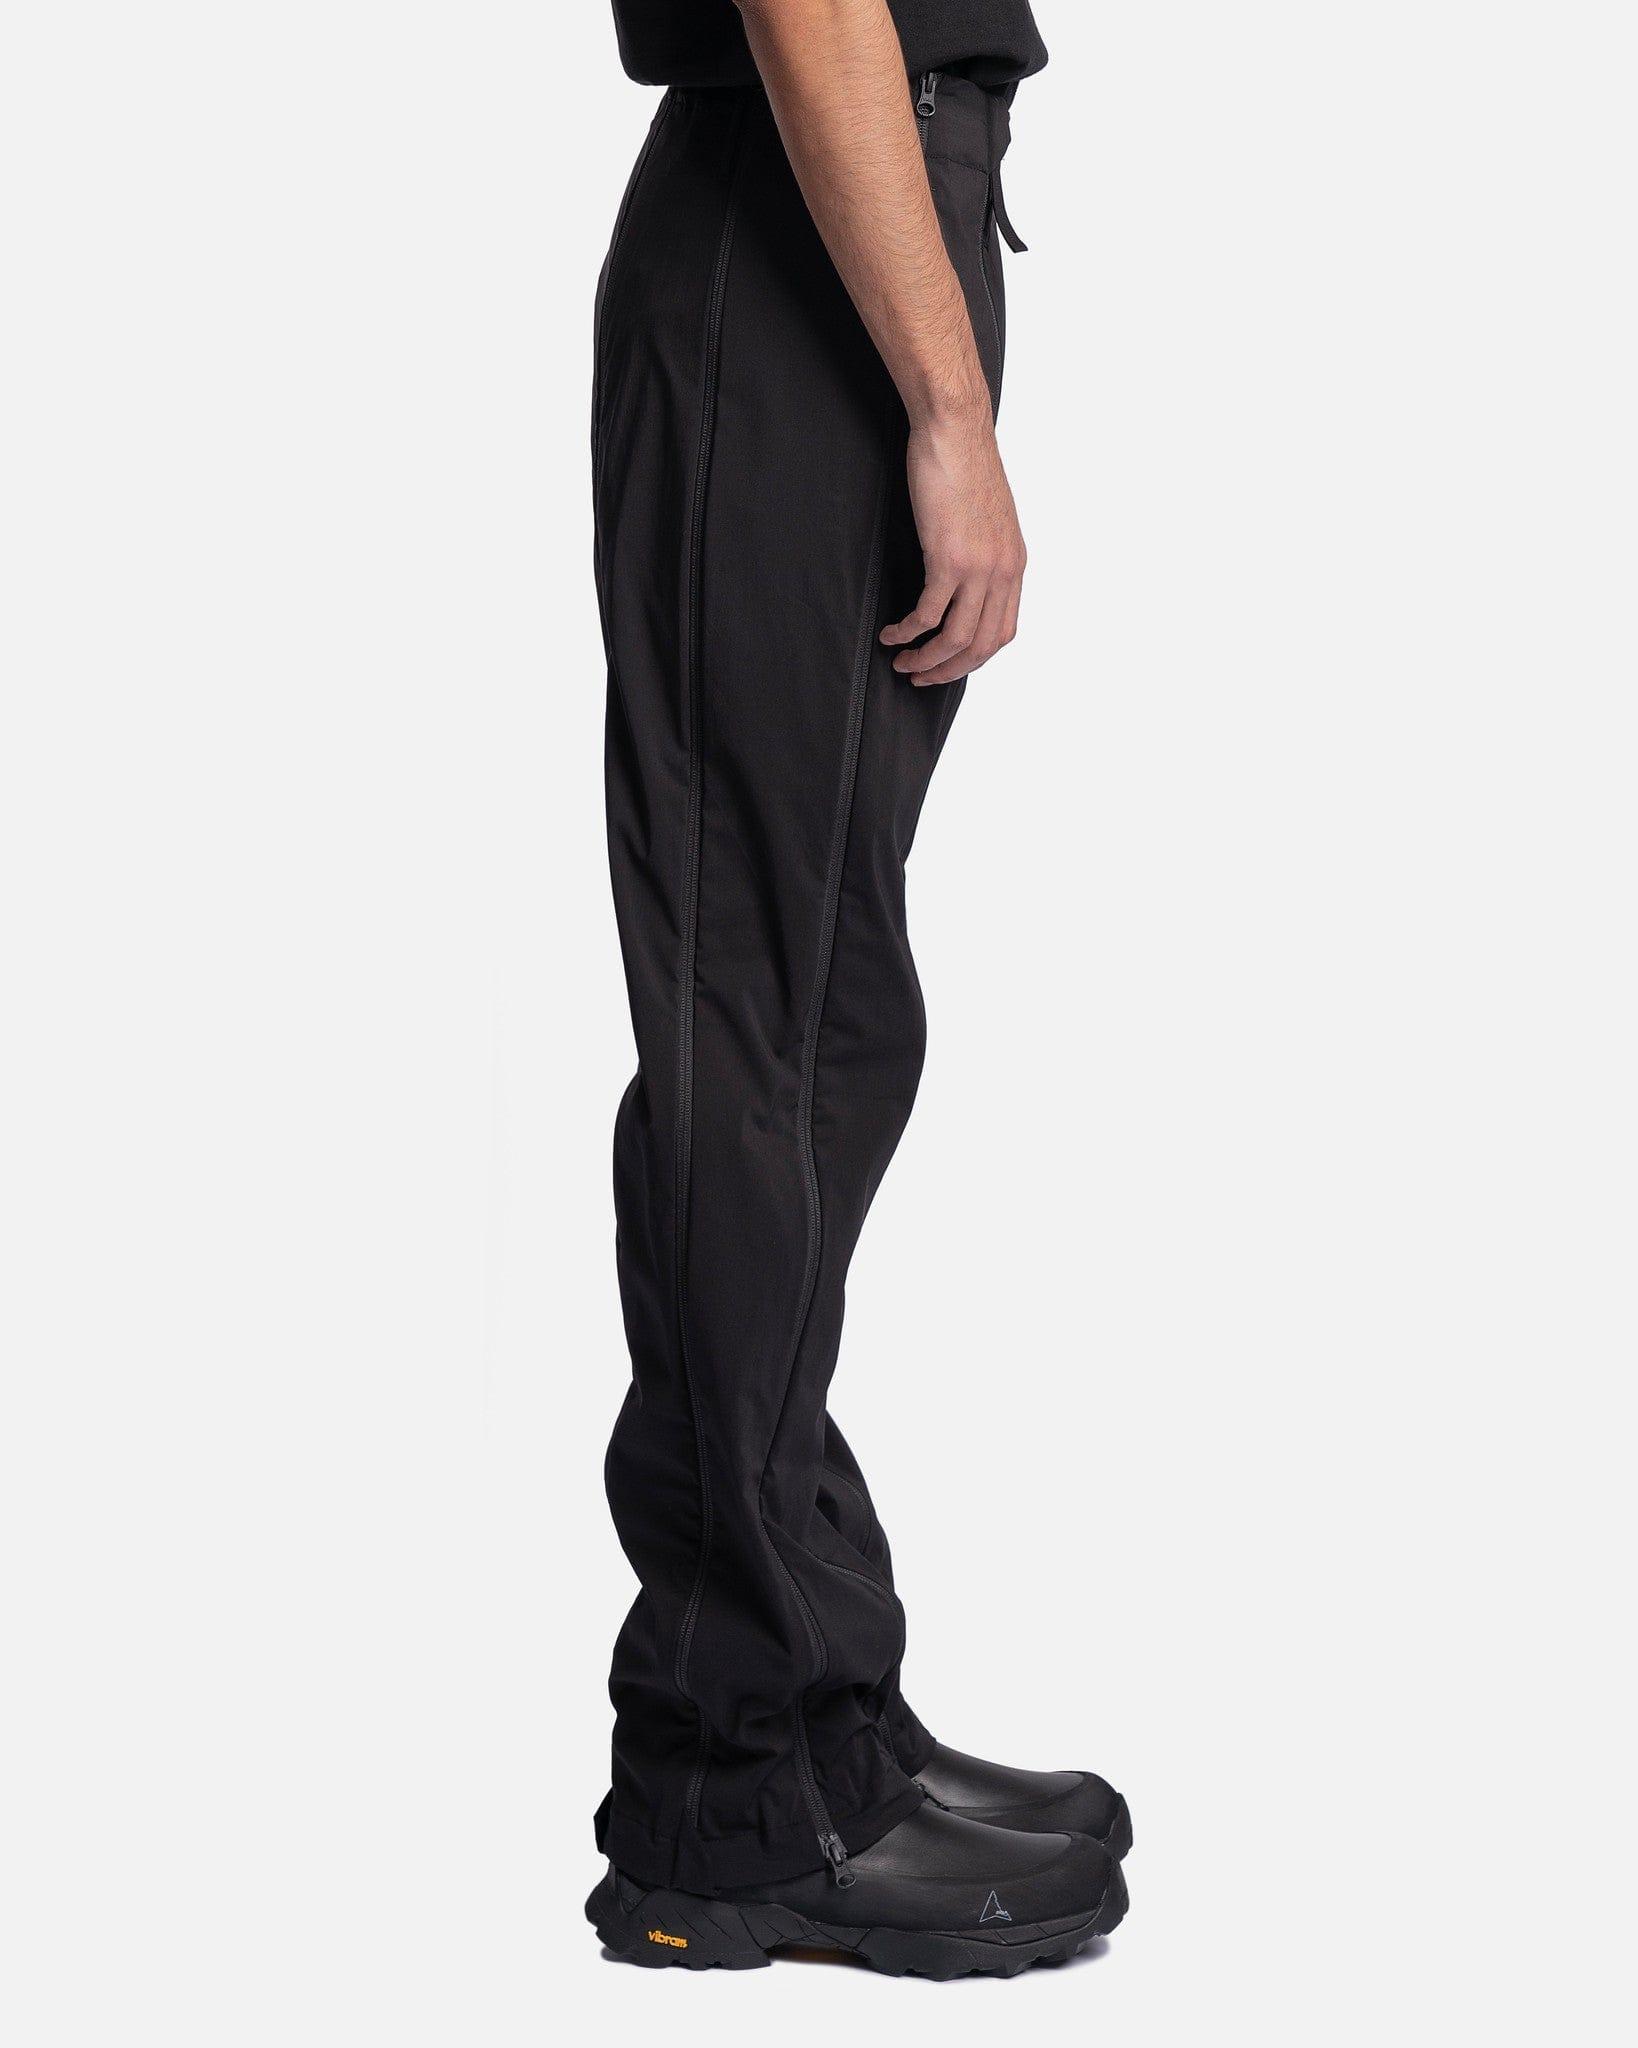 Post Archive Faction PAF 5.0+ Technical Pants Center in Black for 